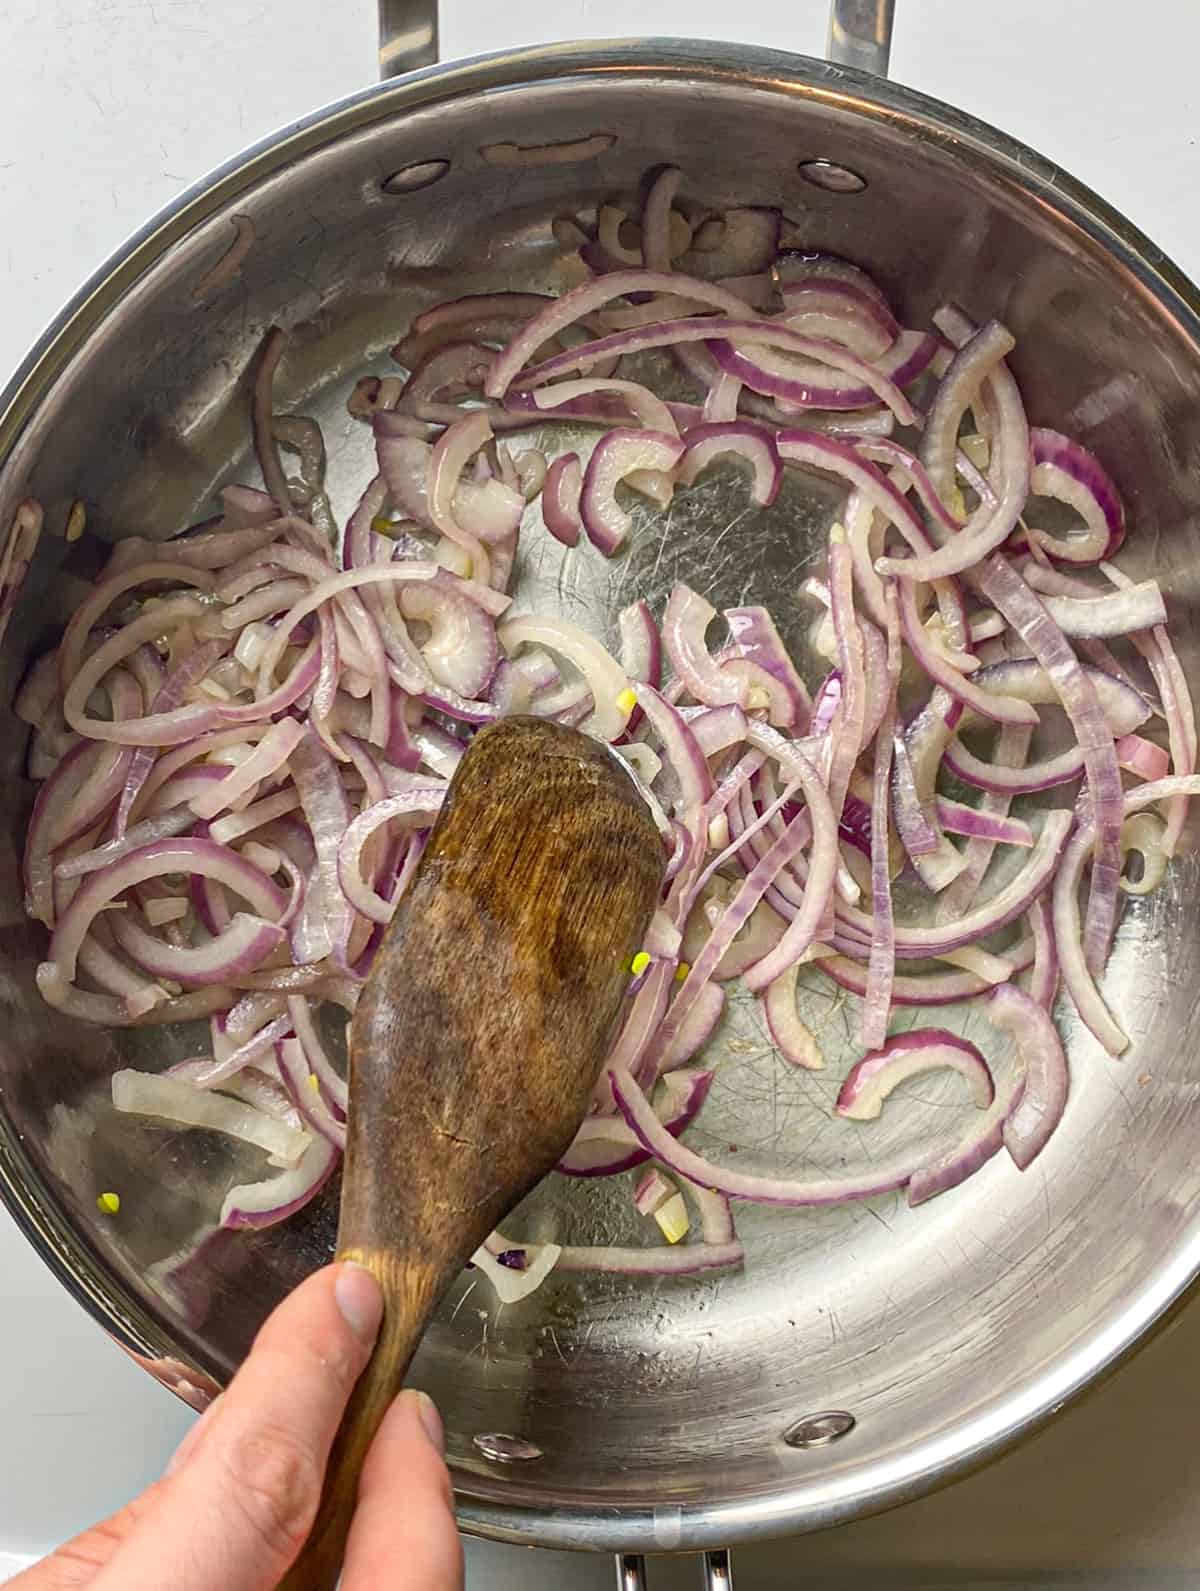 Red onions sautéing in a pan with olive oil. Stirring with a wooden spoon.